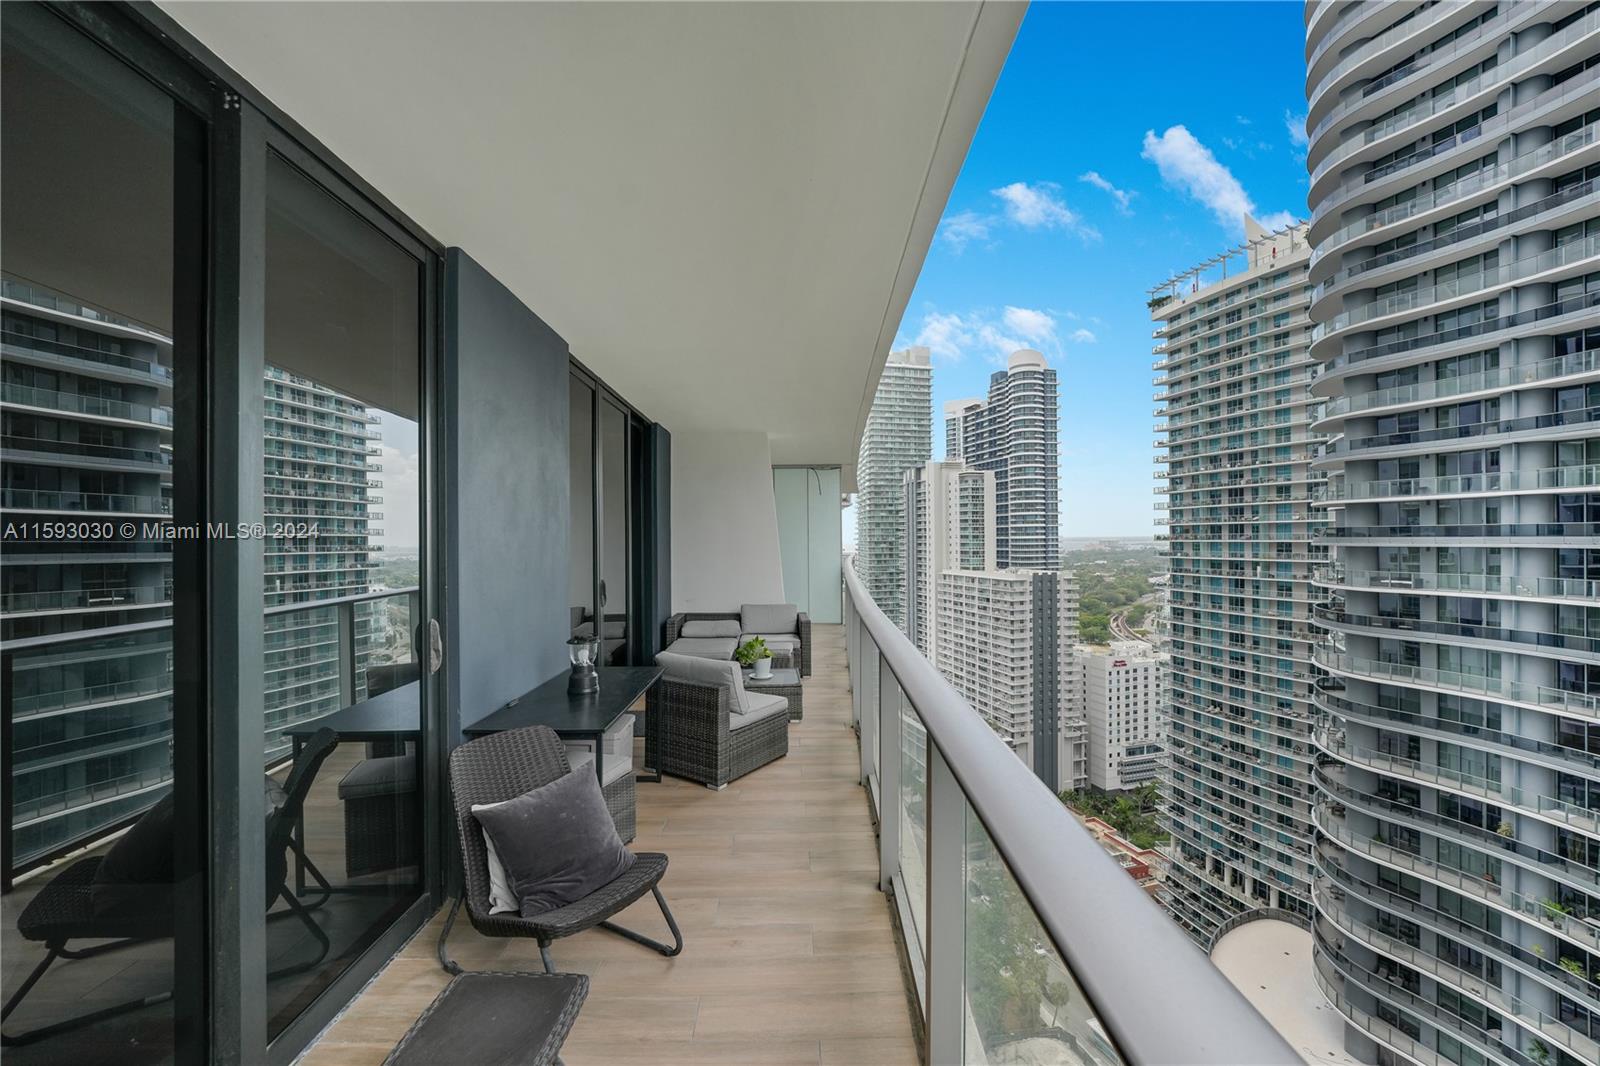 Gorgeous 2/2 in the heart of Brickell, fully furnished with contemporary touches  & modern comfort. Large balcony overlooks the city and makes this unit perfect for outdoor dining. A short stroll to Mary Brickell Village, Brickell City Centre, Miami's top restaurants, shopping and much more. Tile floors throughout. Washer and dryer in the unit. Expect the best amenities: basketball & squash courts, spa, movie theater, bowling, golf, arcade, sauna & steam room, state of the art gym, pools (indoor heated pool and rooftop pool with breathtaking views), BBQ area, kids playroom, outdoor running track, social room, and 24-hour concierge.